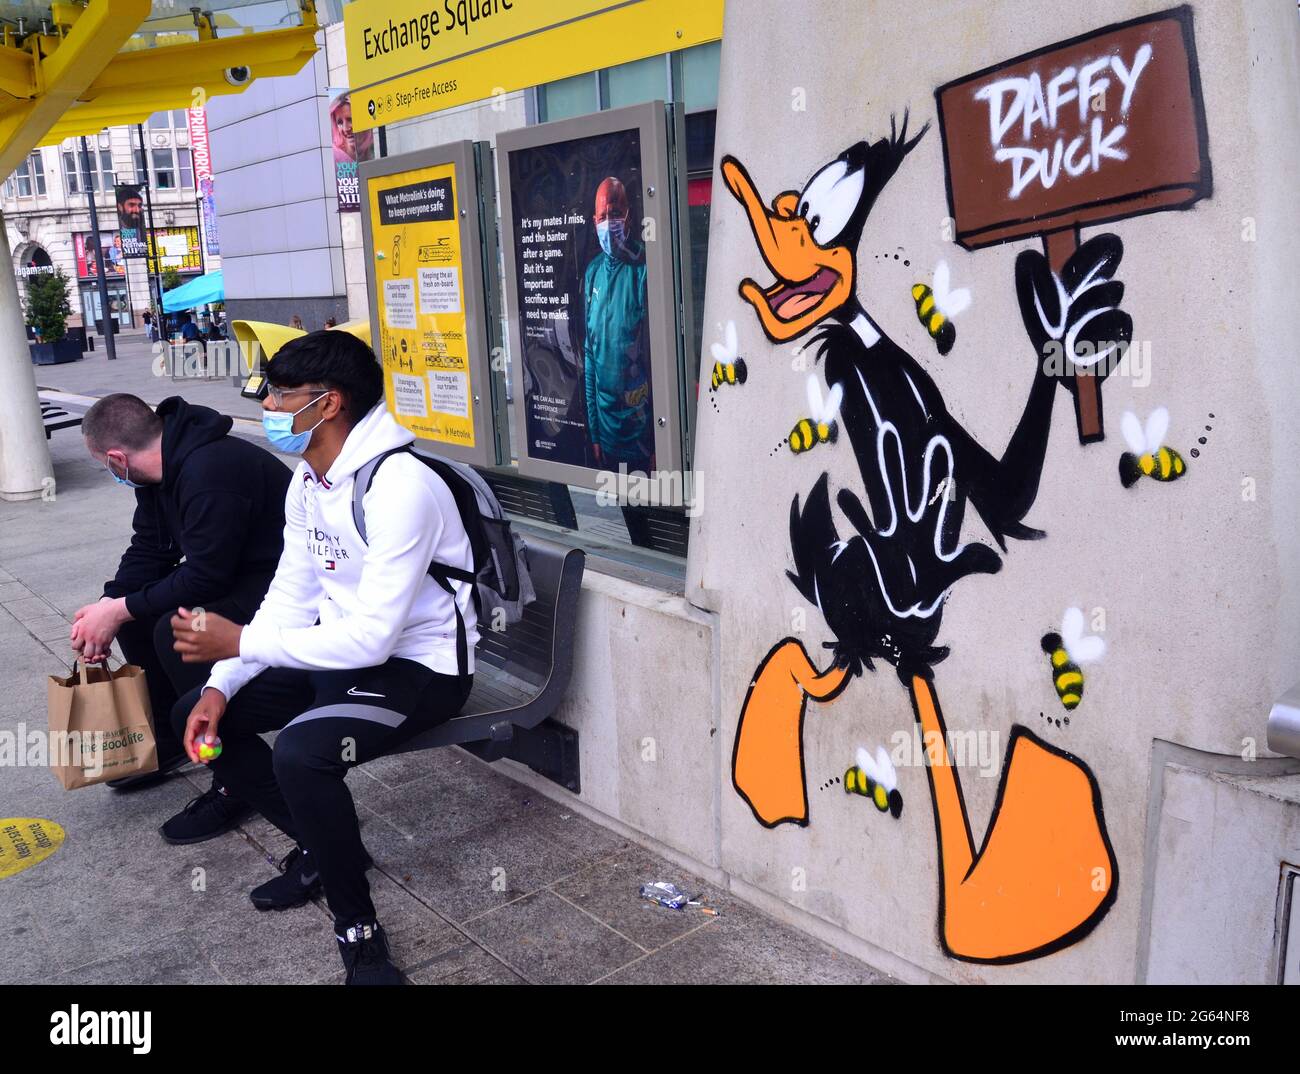 Men sit next to an image of Daffy Duck cartoon character, part of a Looney Tunes art trail which has opened in Manchester, England. Stock Photo